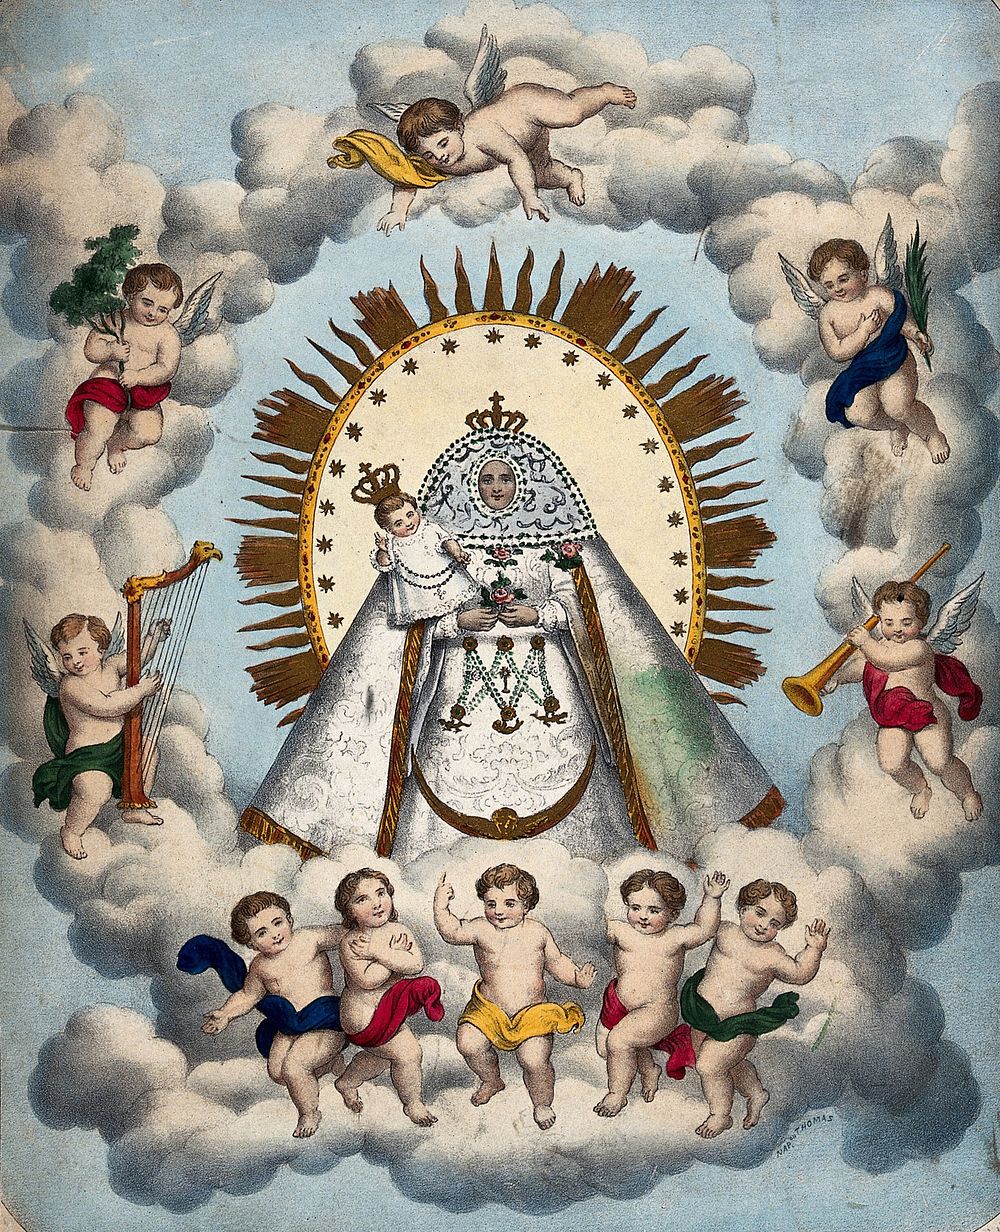 The Virgin with Child on clouds with angels. Coloured lithograph by N. Thomas.